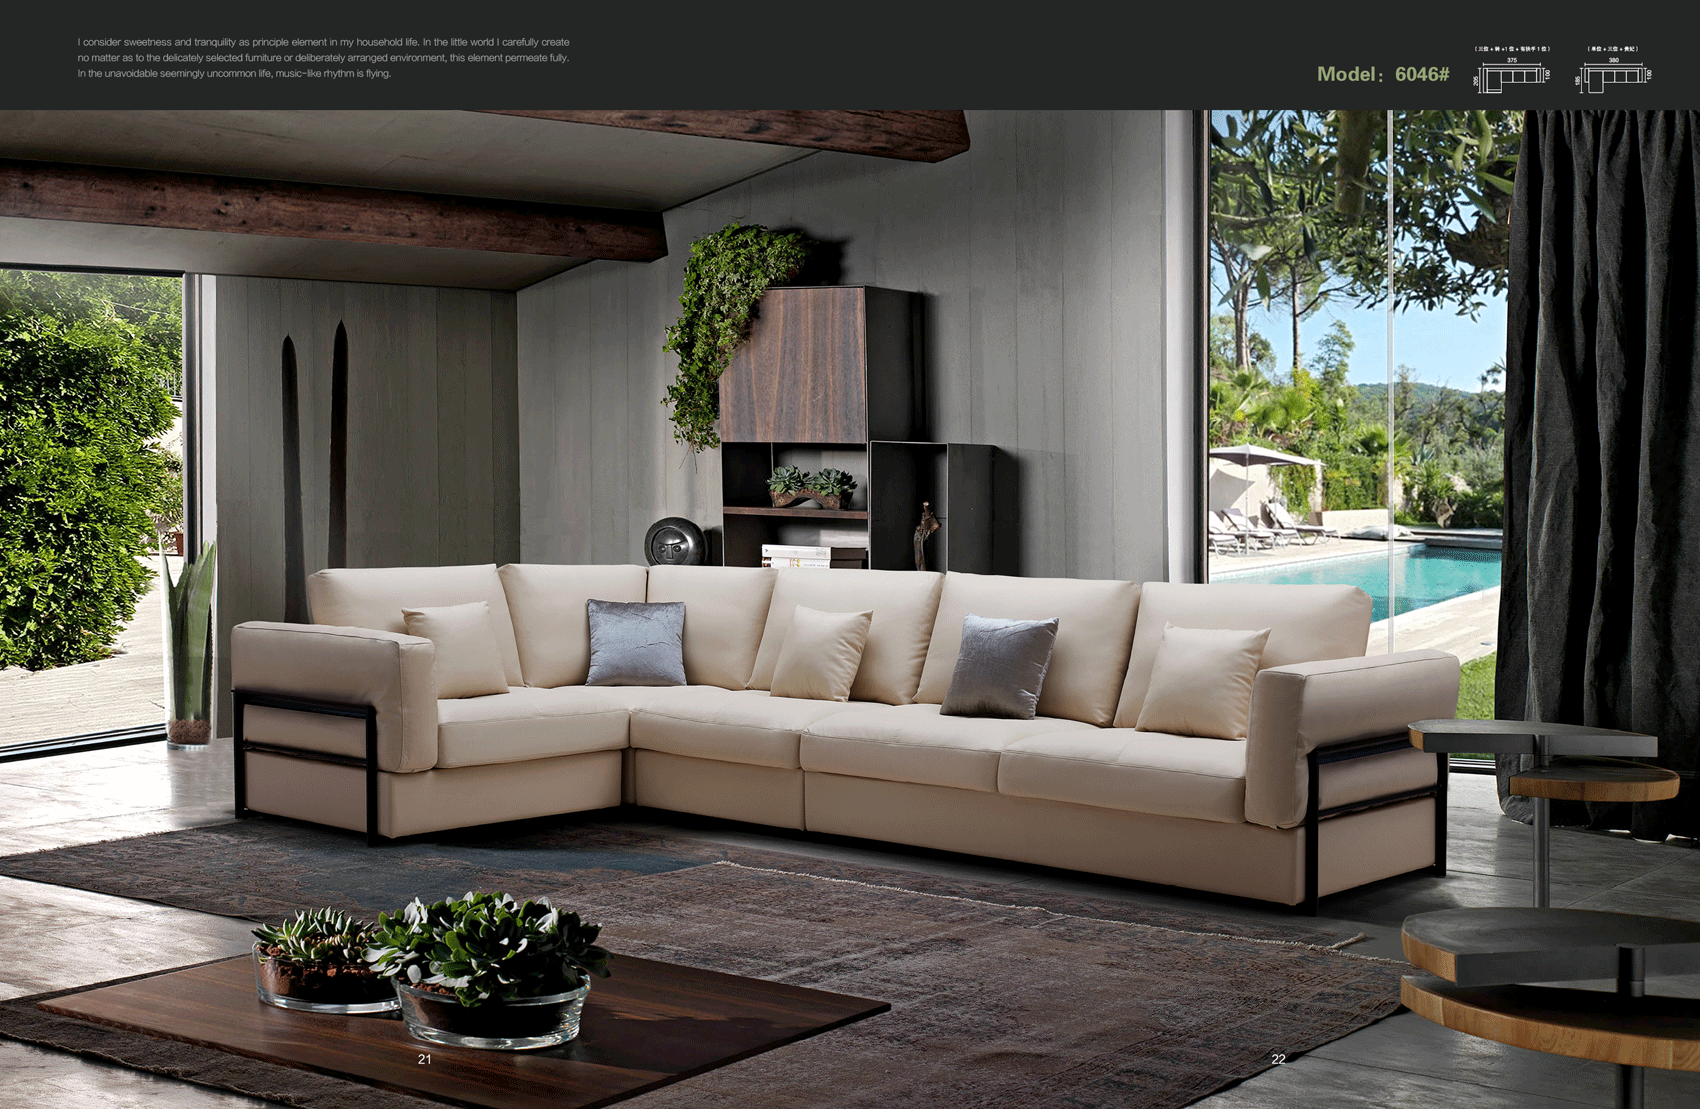 Brands ALF Capri Coffee Tables, Italy 6046 Sectional